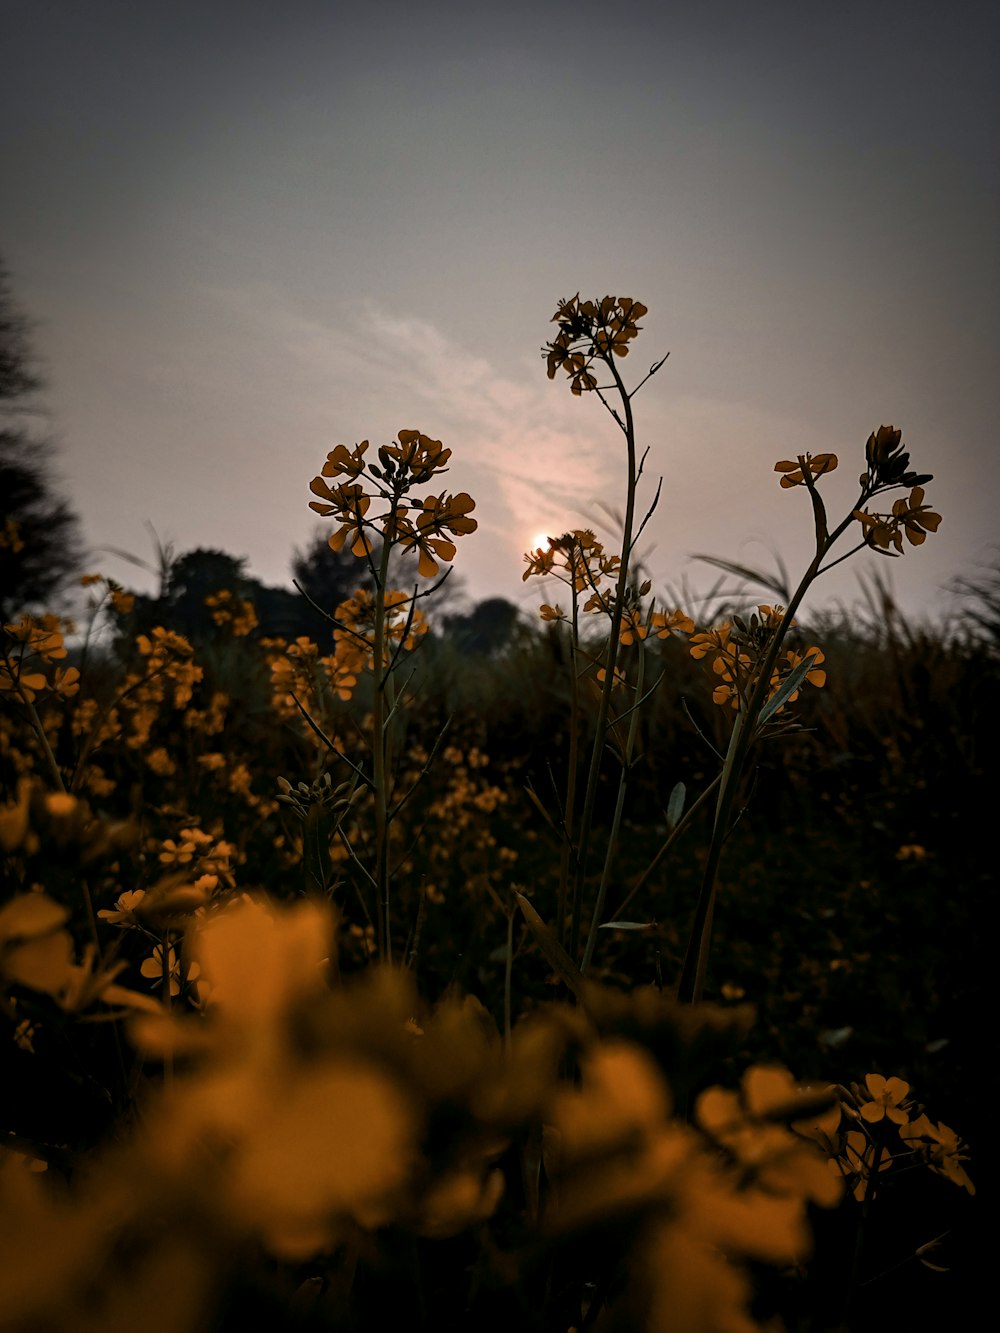 the sun is setting over a field of wildflowers